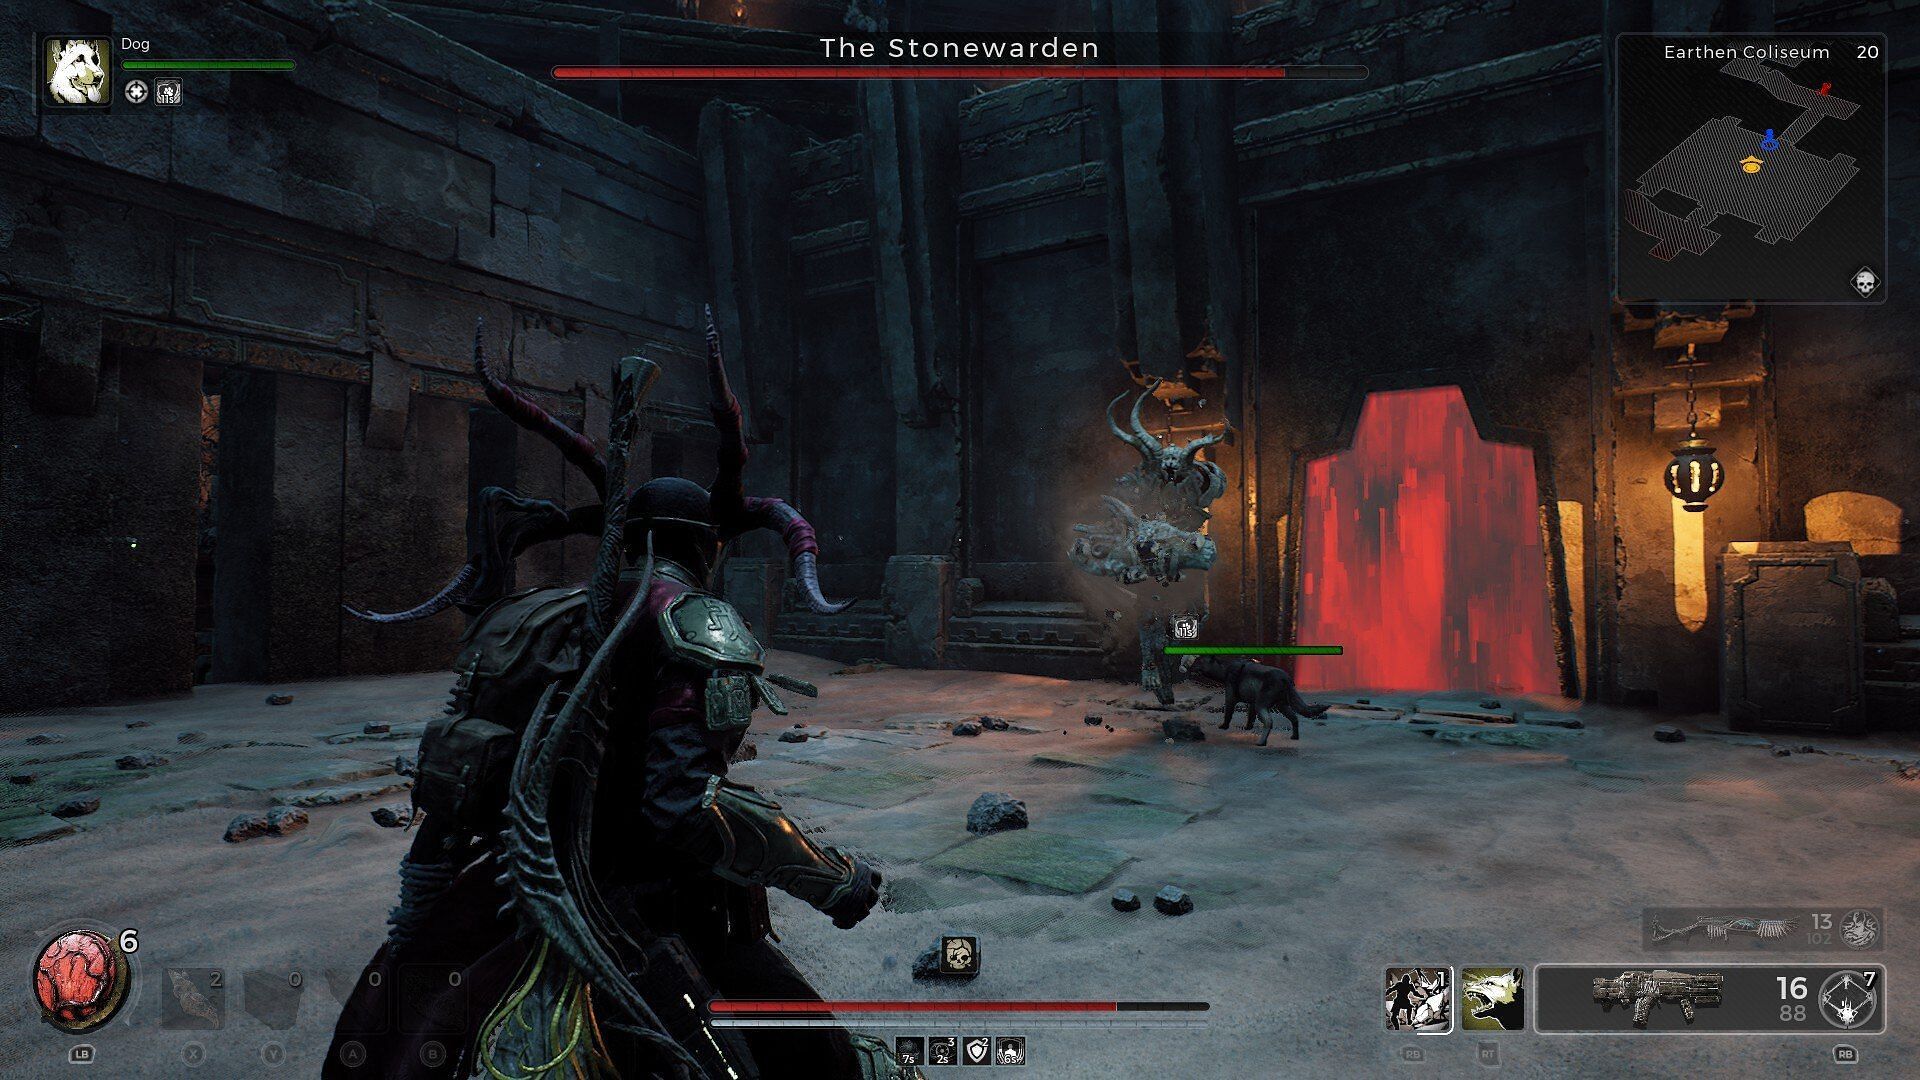 Even the early-dungeon bosses like the Stonewarden were quite challenging on Nightmare (Image via Gearbox Publishing)